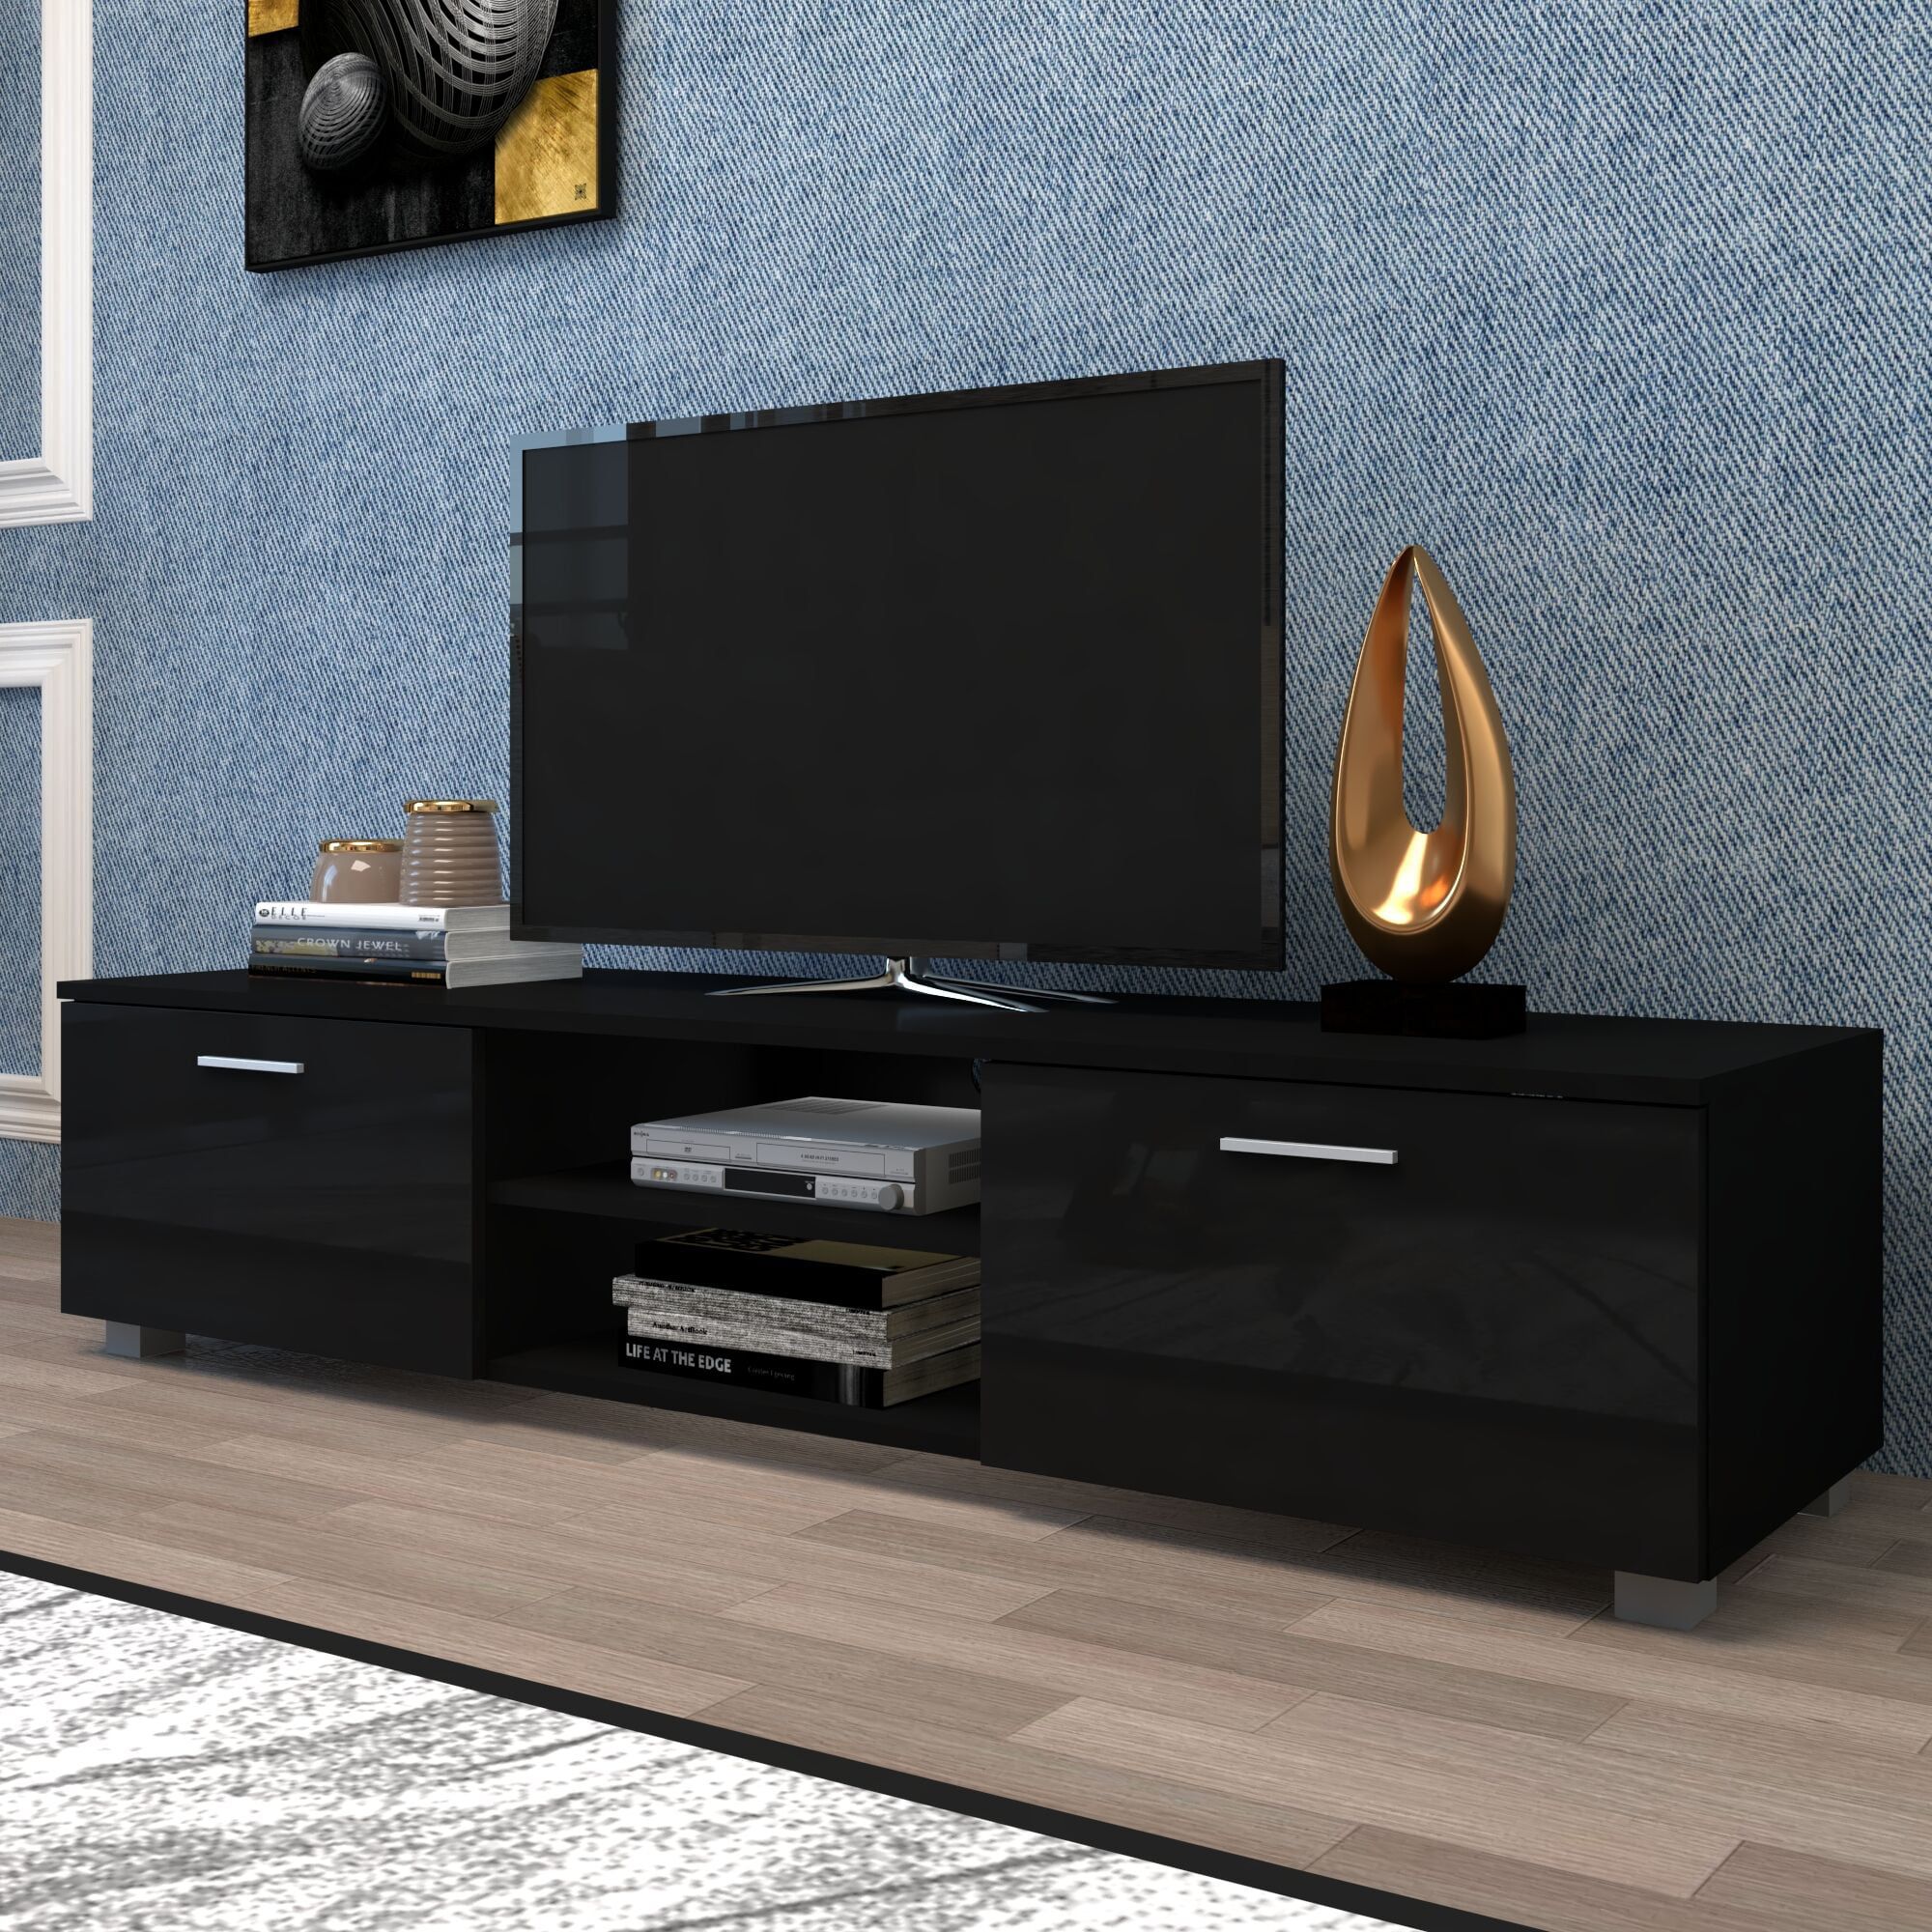 Black Modern Tv Stand For 70 Inch Tv Stands, Media Console In Dual Use Storage Cabinet Tv Stands (View 16 of 20)